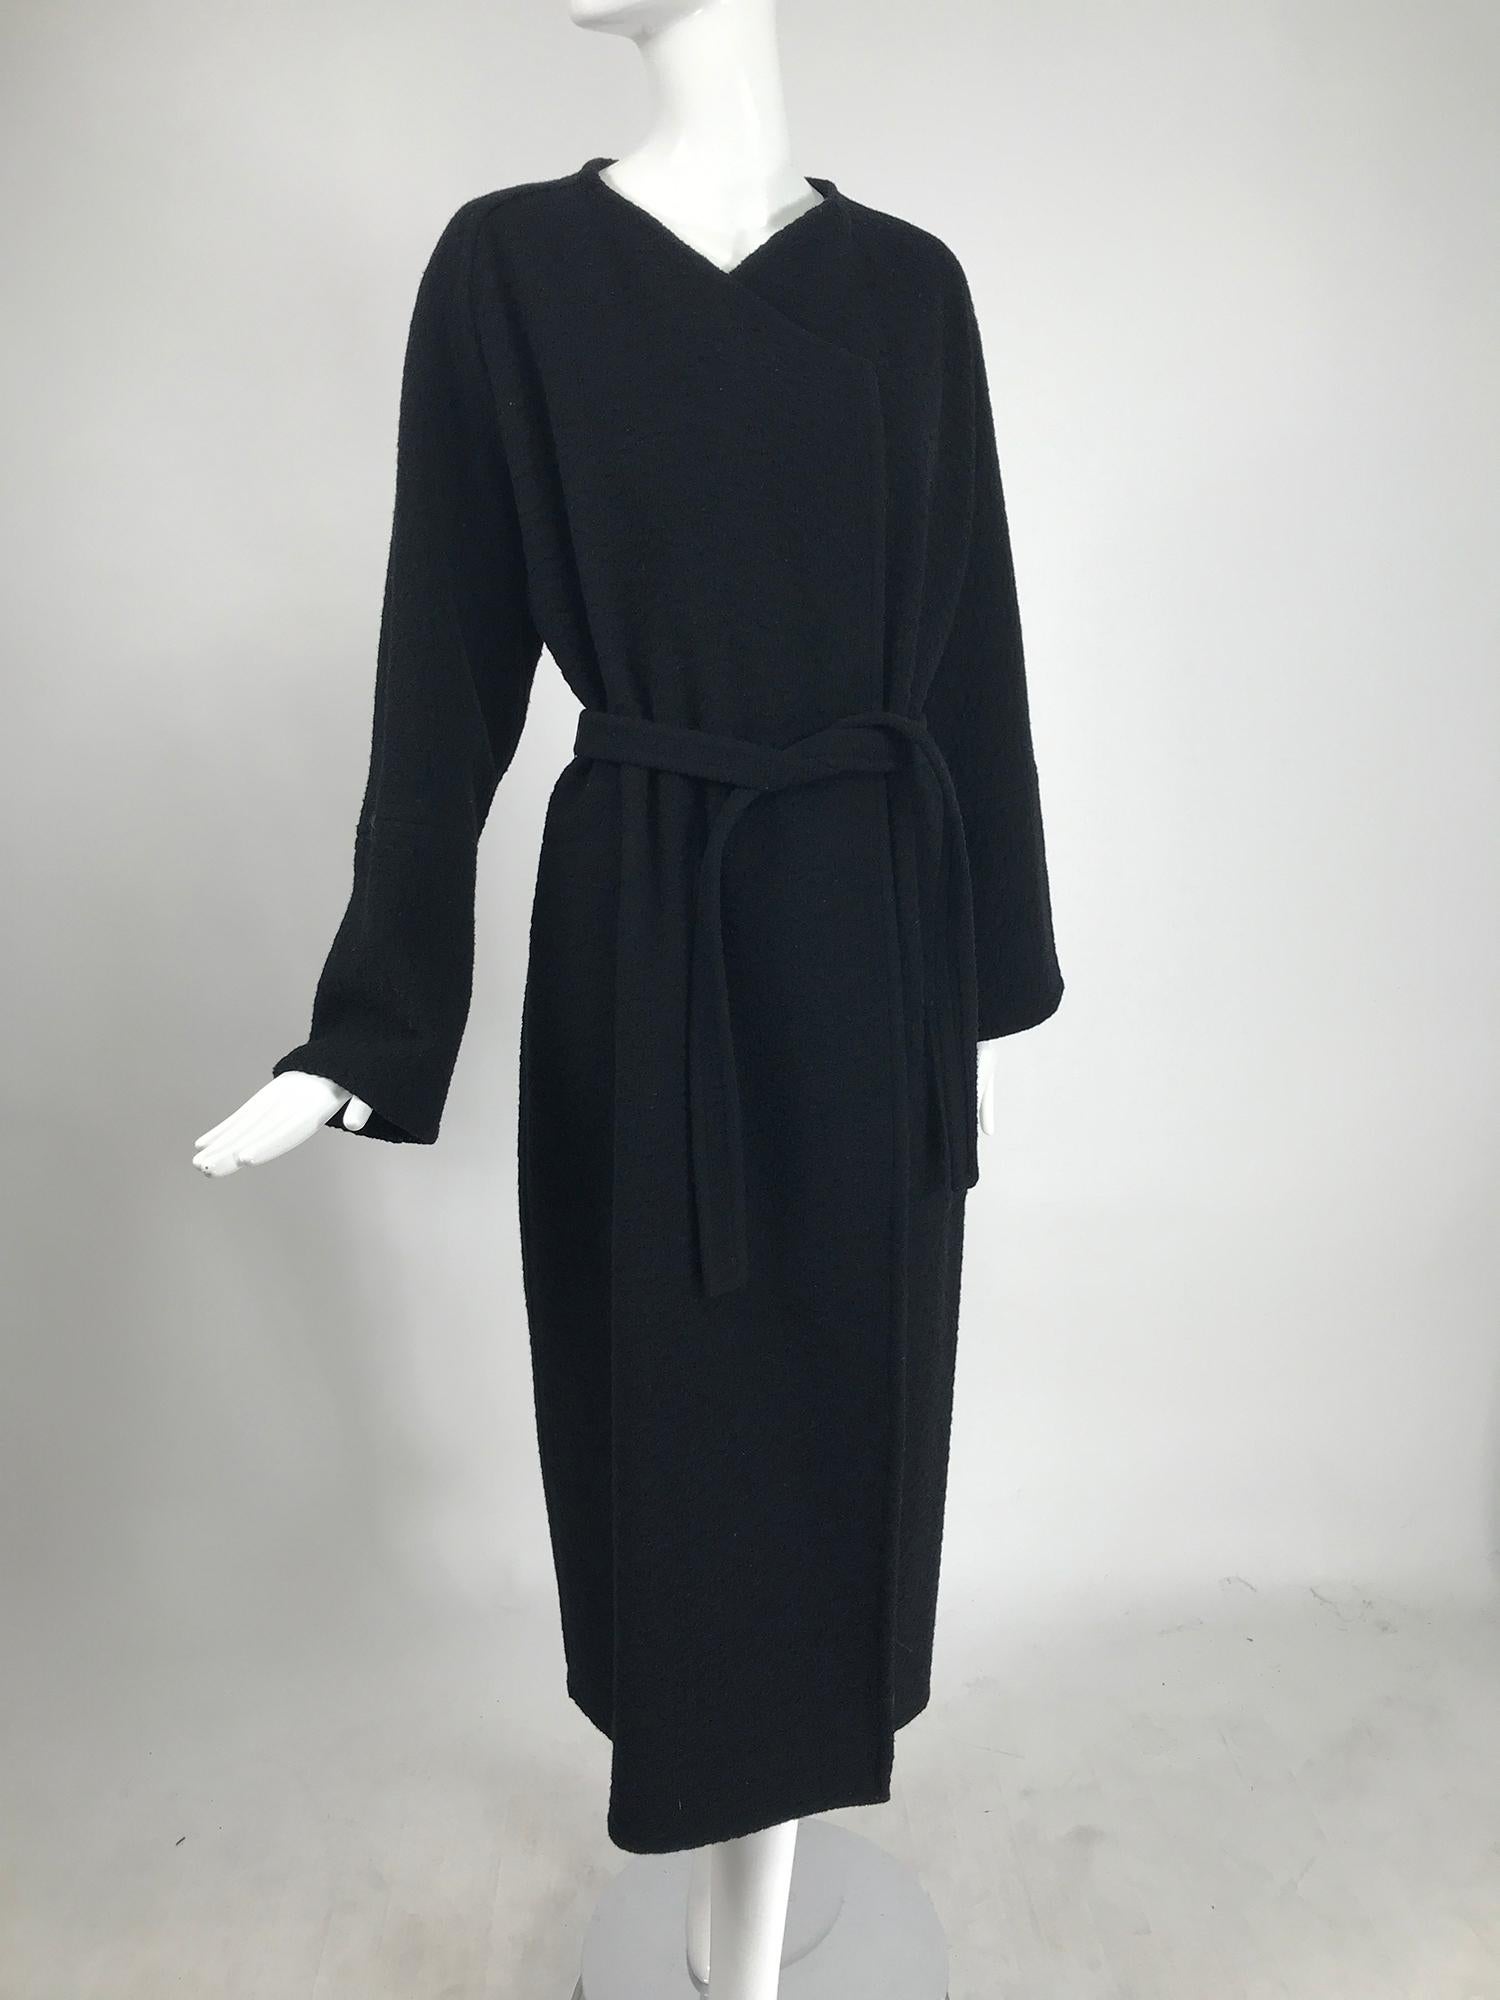 Yeohlee black textured double face wool wrap coat from the 1990s. Unlined coat with an angled shape neckline, wrap coat with self belt. Long sleeves have horizontal stitching mid way and can be turned back for a cuff. Below knee length coat has a